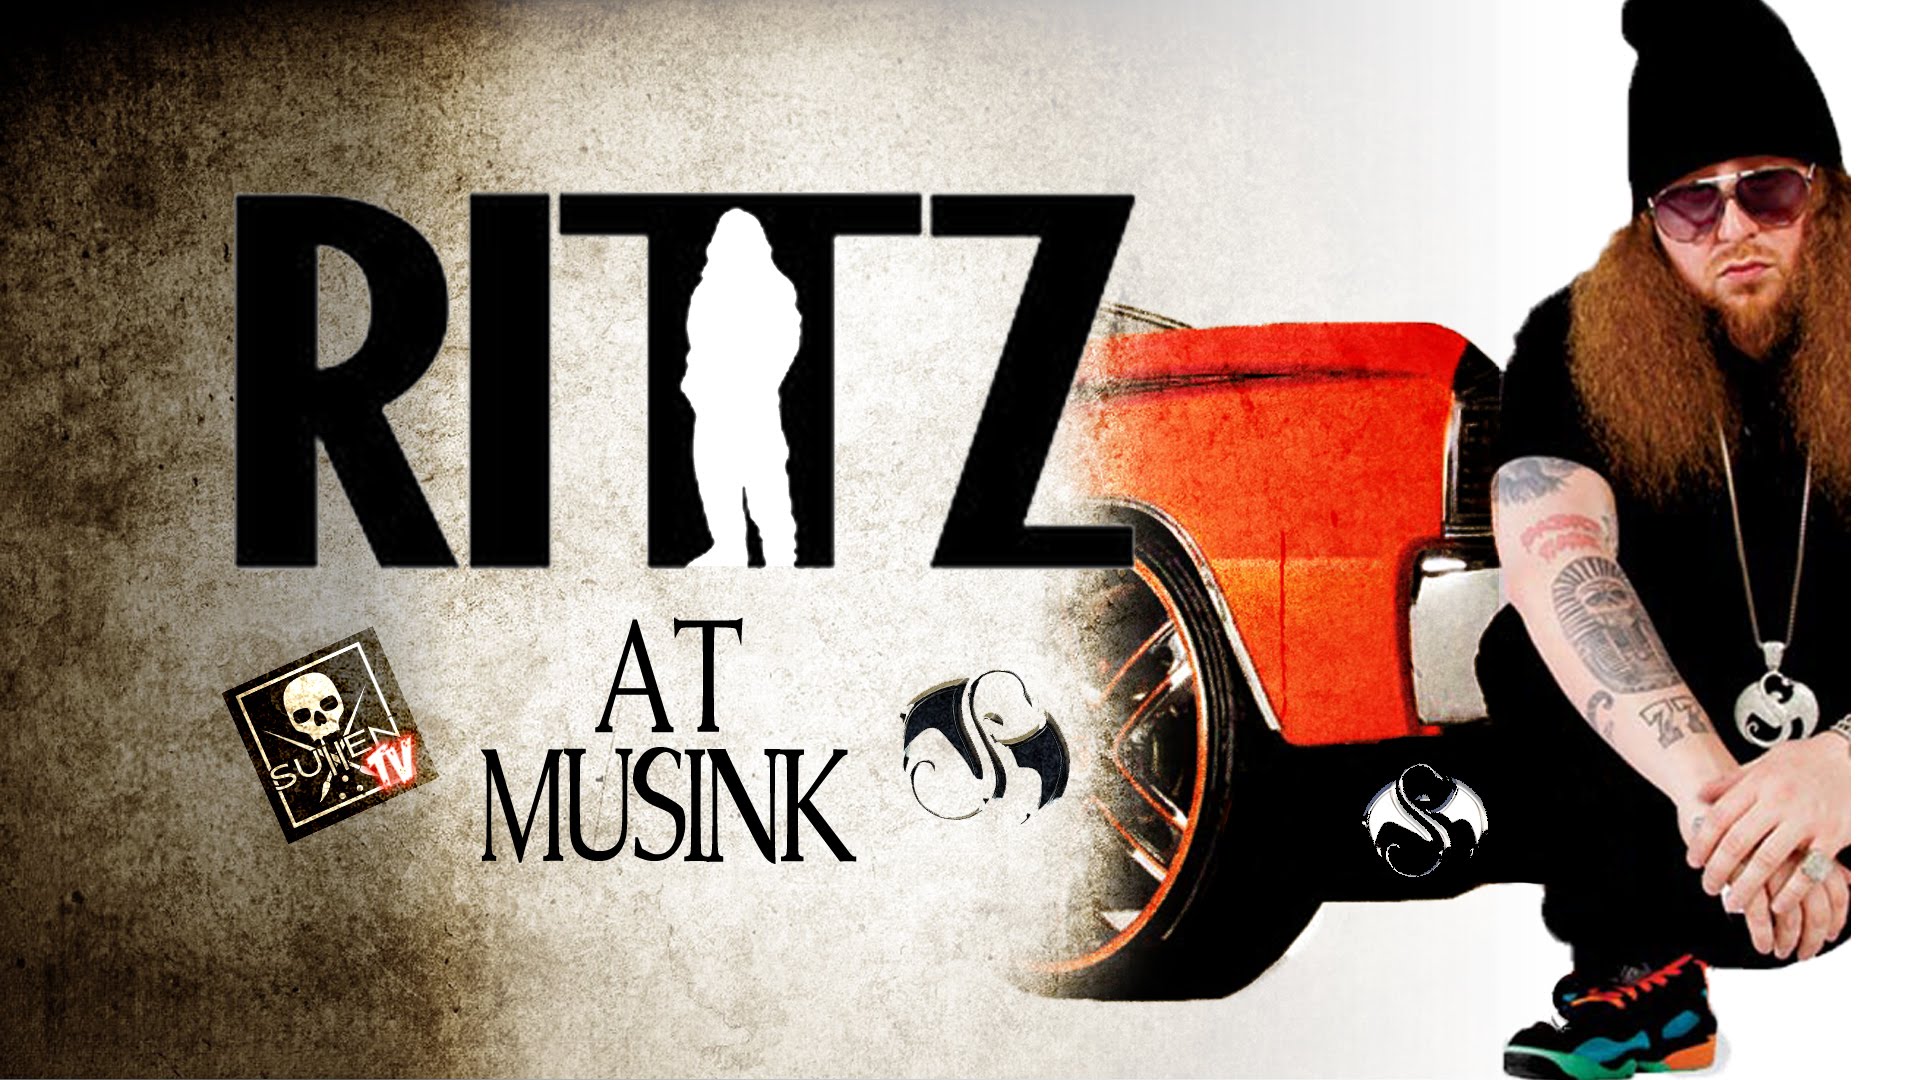 Rittz Inter Performance At Musink Faygoluvers Mobile